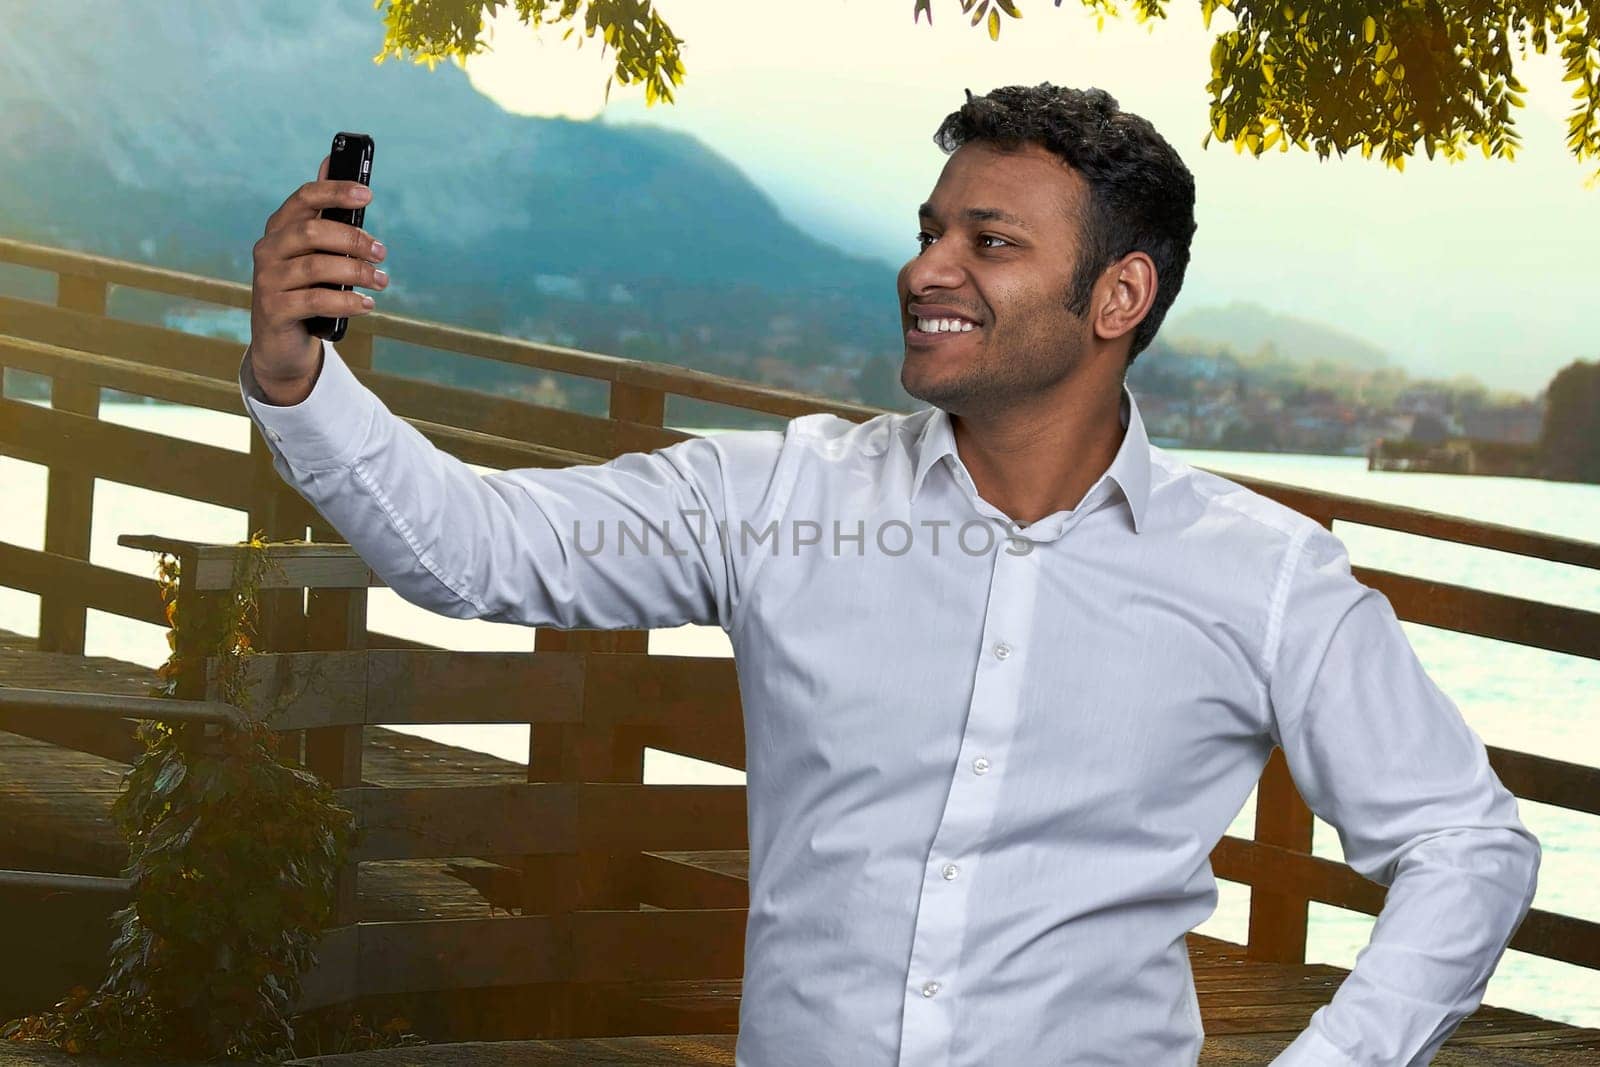 Smiling indian businessman taking selfie on his phone outdoors. People, technology and tourism concept.